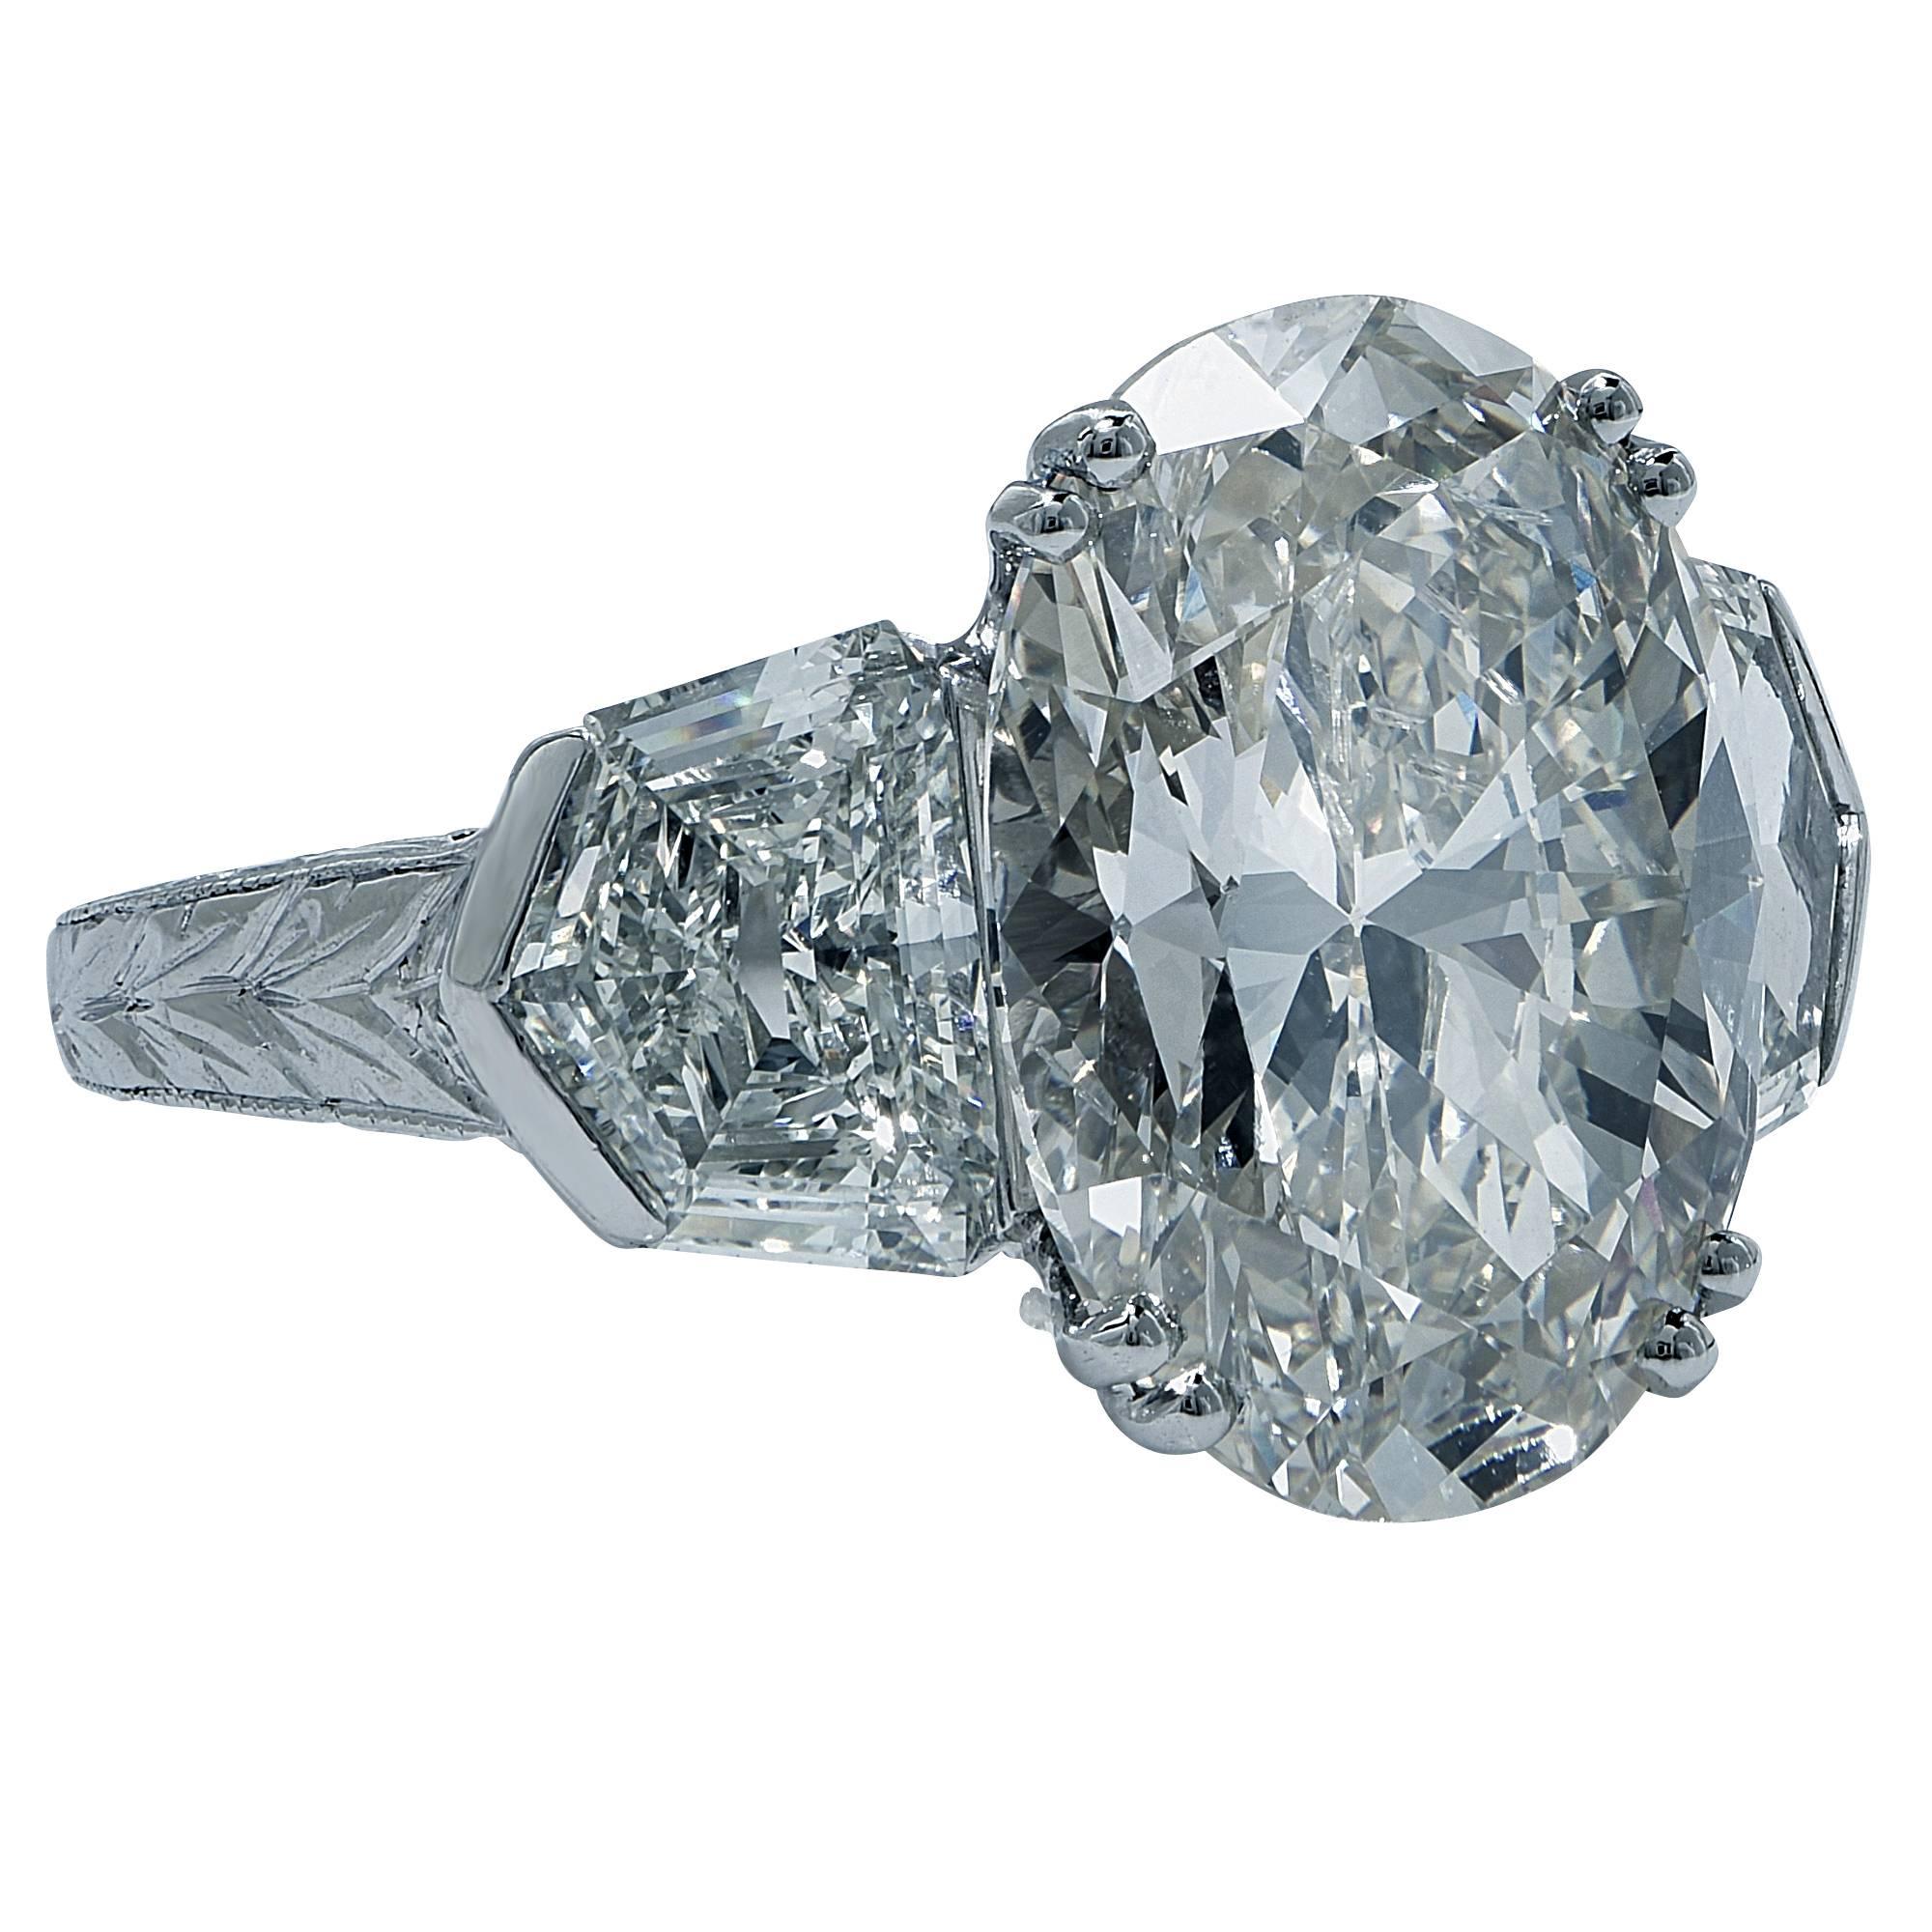 Platinum custom-made ring featuring a 7.52ct oval cut diamond I color I1 clarity, flanked by 2 shield cut diamonds weighing approximately 1.73cts total H color VS clarity.

The ring is a size 9 and can be sized up or down.
It is stamped and/or